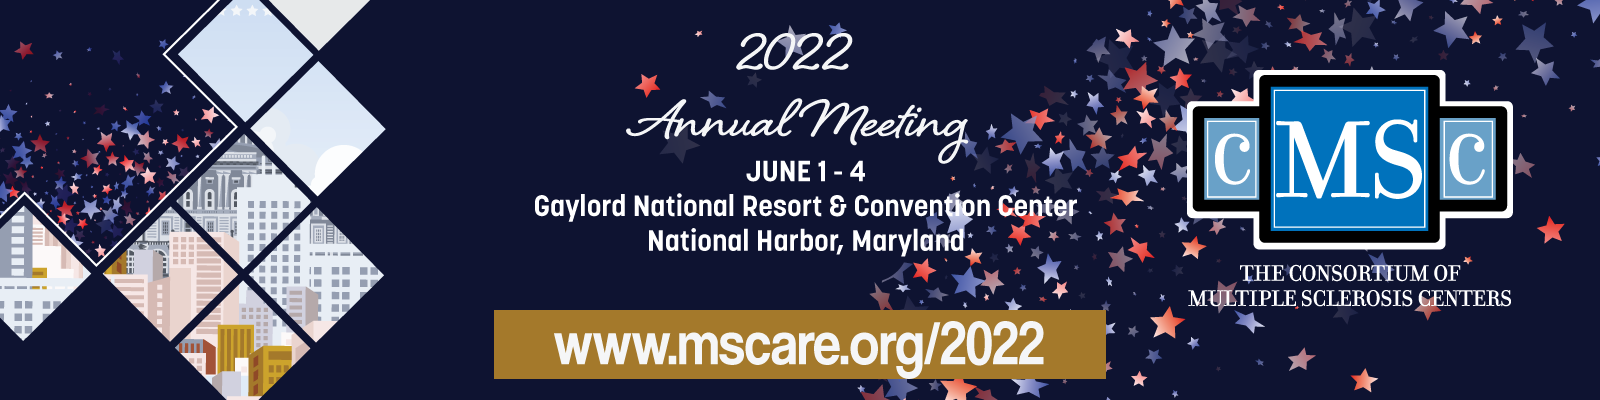 2022 Annual Meeting of the Consortium of Multiple Sclerosis Centers